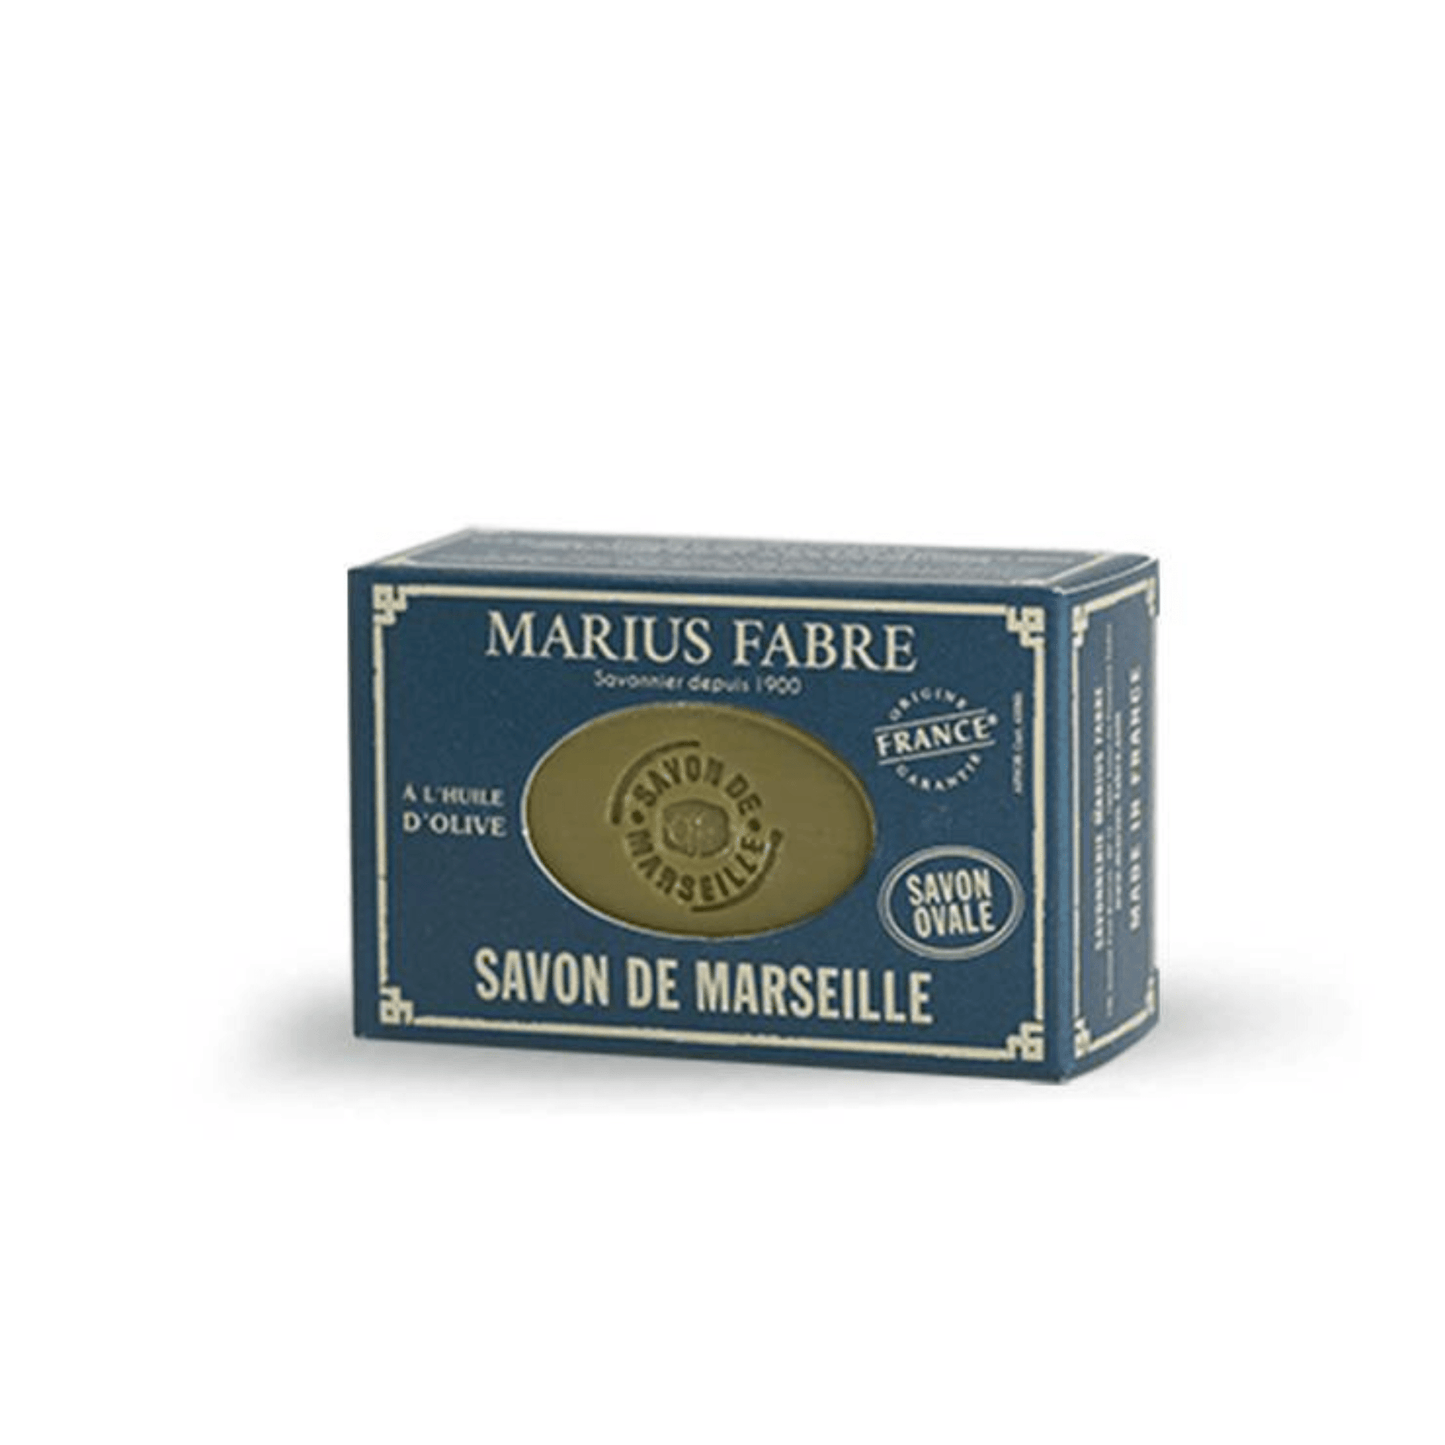 Primary Image of Olive Oil Marseille Oval Bar Soap